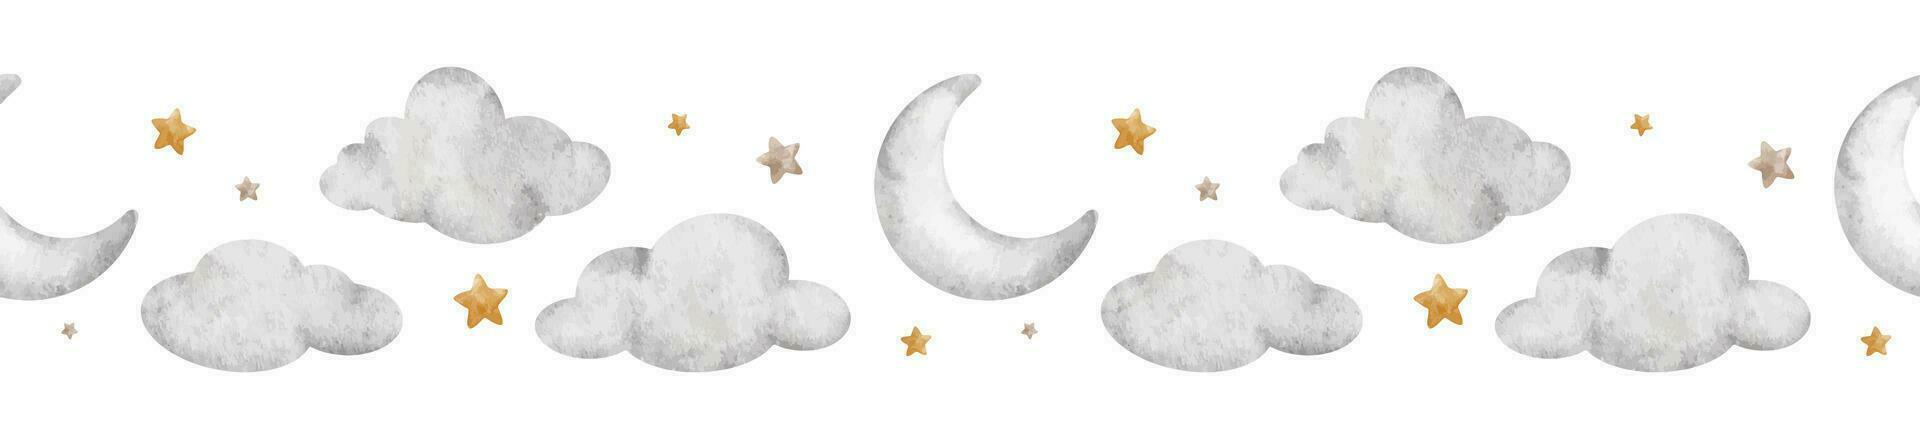 Crescent moon and stars. Cute baby seamless border. Children's background. Watercolor border Isolated. Design for kid's goods, postcards, baby shower and children's room vector